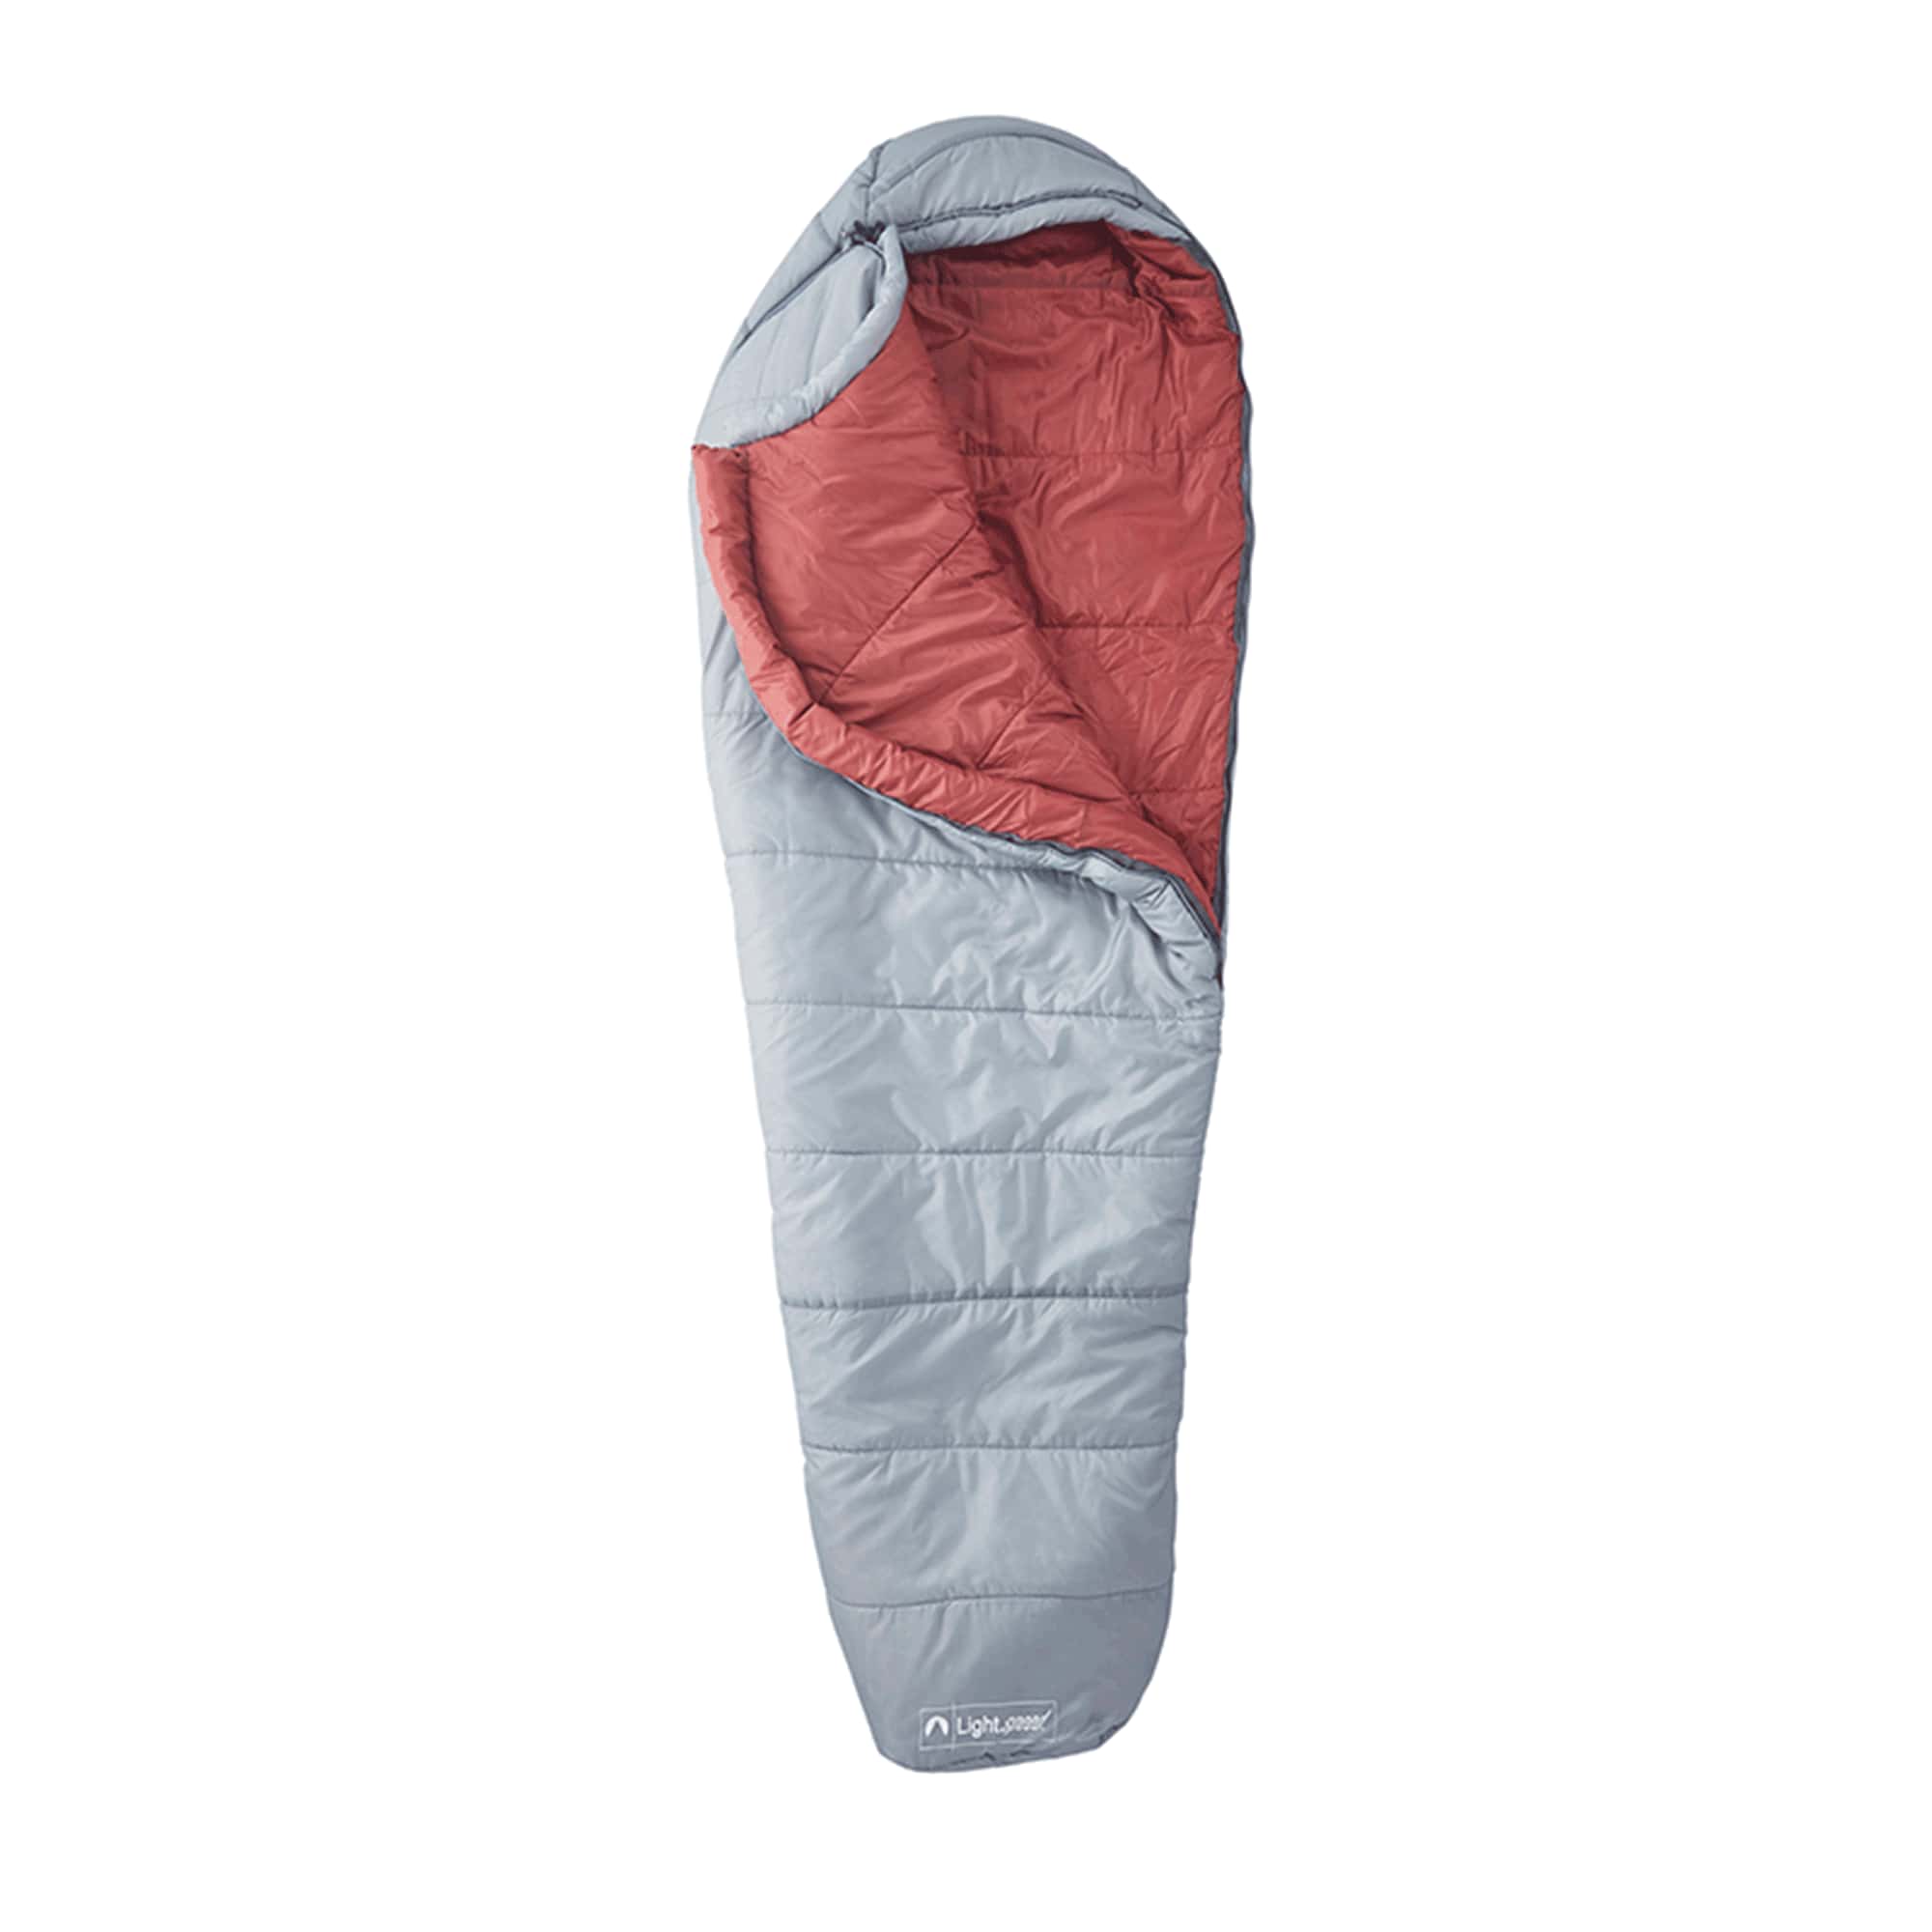 Lightspeed Outdoors 3 Season Water Resistant Ripstop Mummy Sleeping Bag in  Oversized Footbox with Compression Stuff Sack